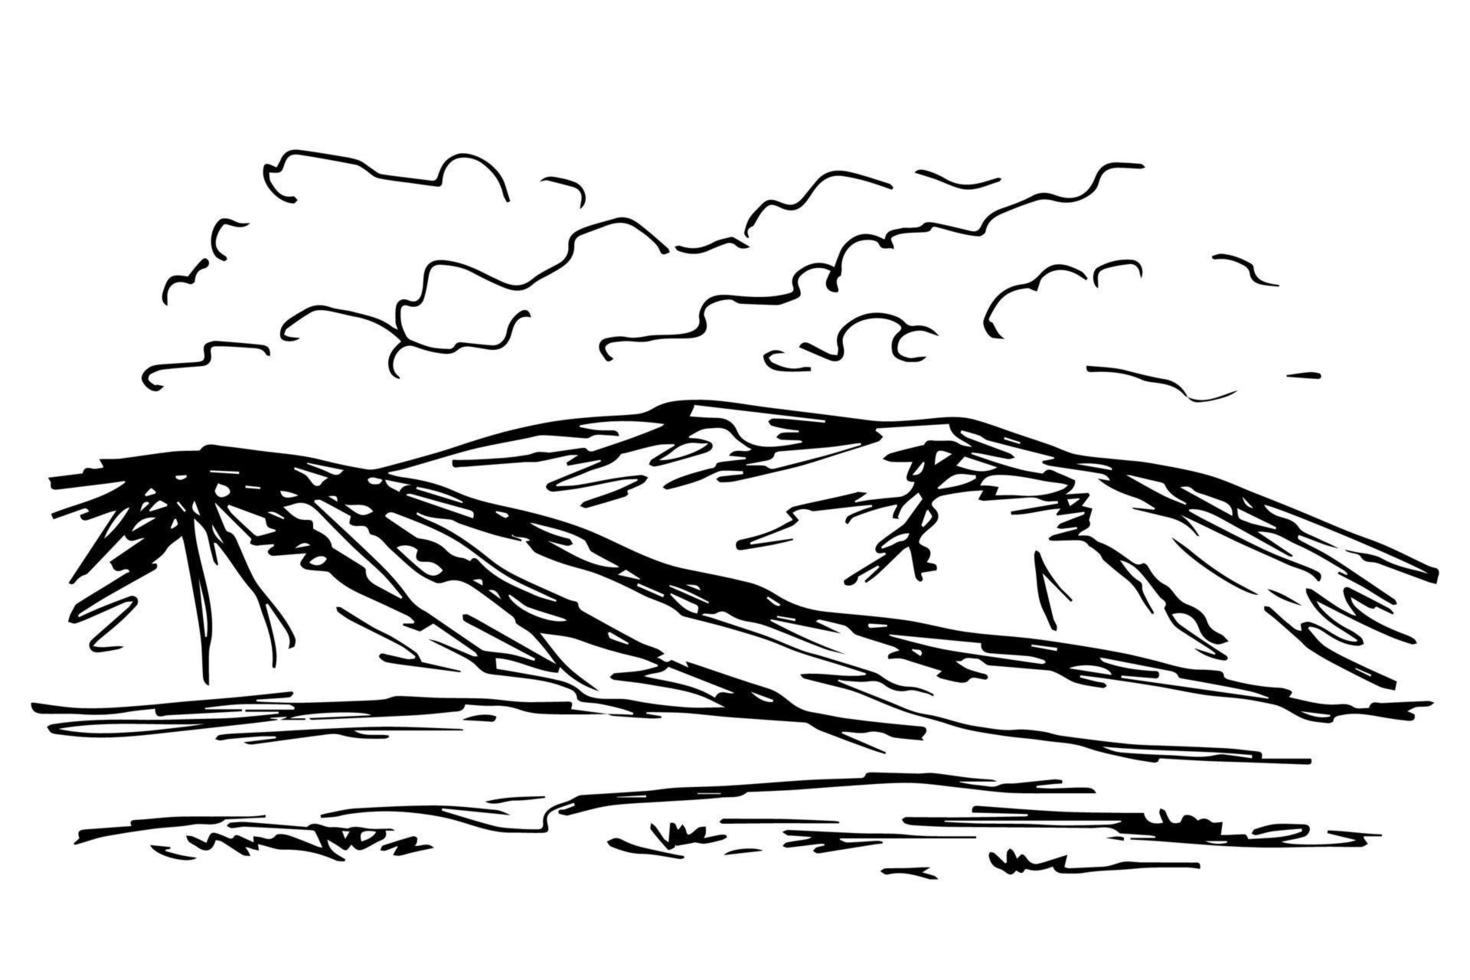 Simple vector ink drawing in engraving style. Silhouette of mountains on the horizon, clouds, hills, nature, foothills. Rock landscape, wildlife.